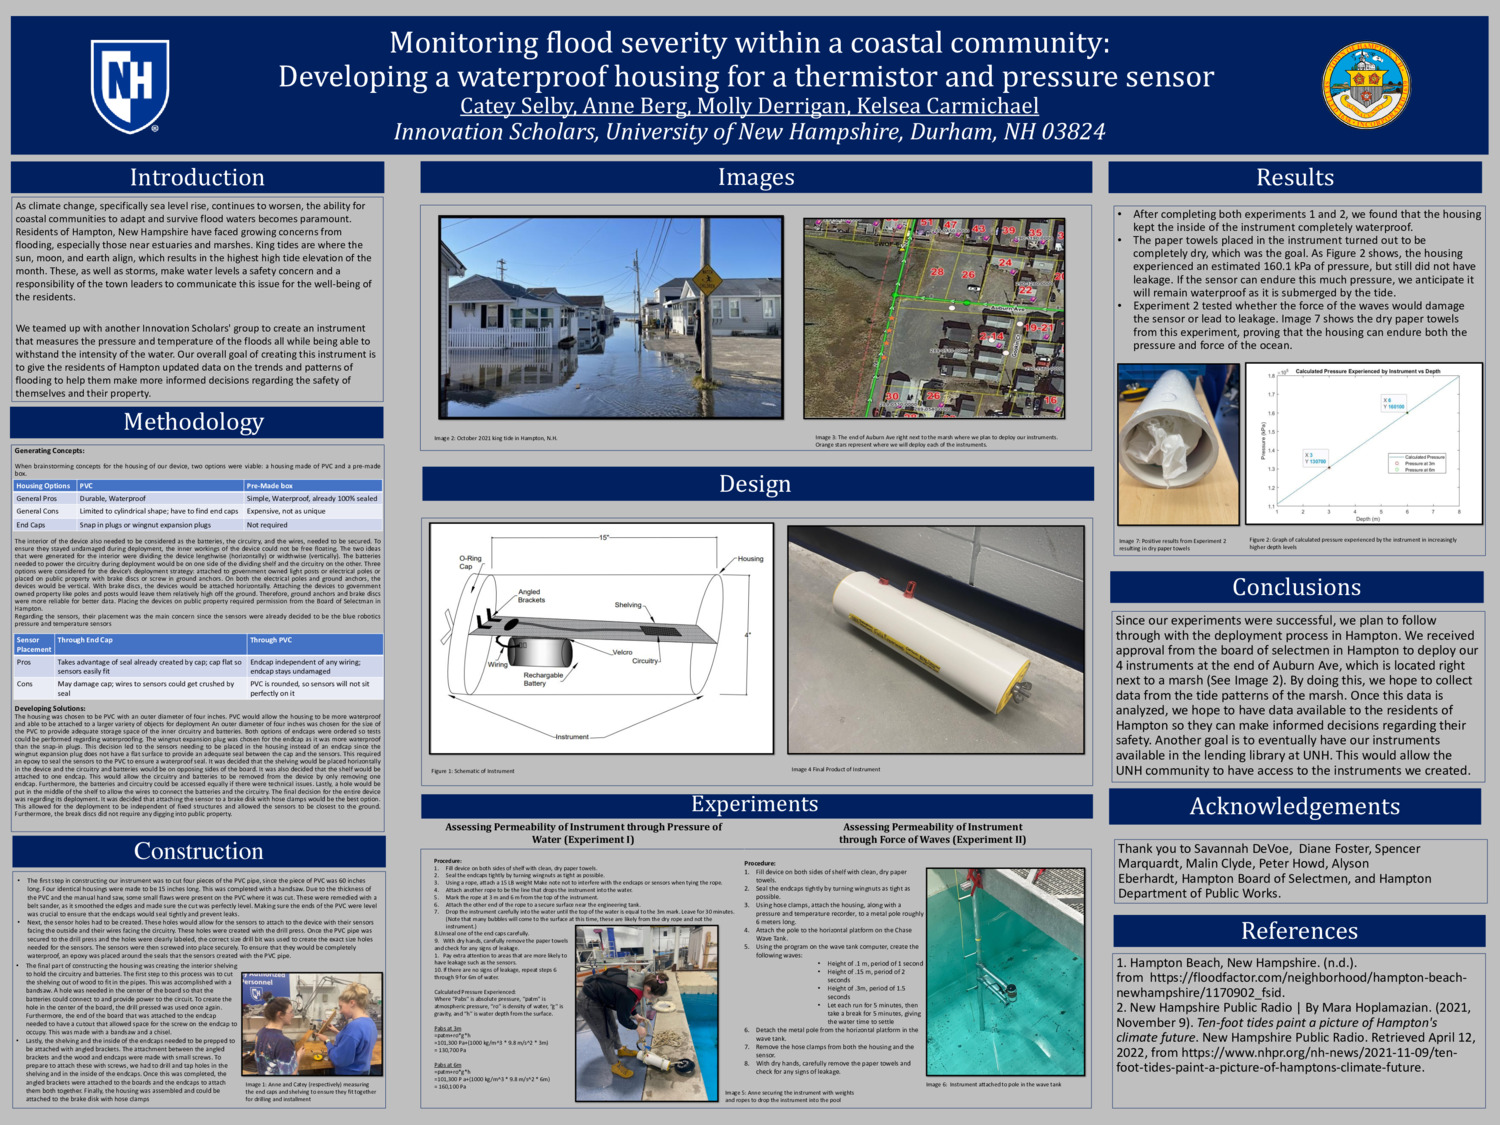 Monitoring Flood Severity Within A Coastal Community: Developing A Waterproof Housing For A Thermistor And Pressure Sensor by kbc1025